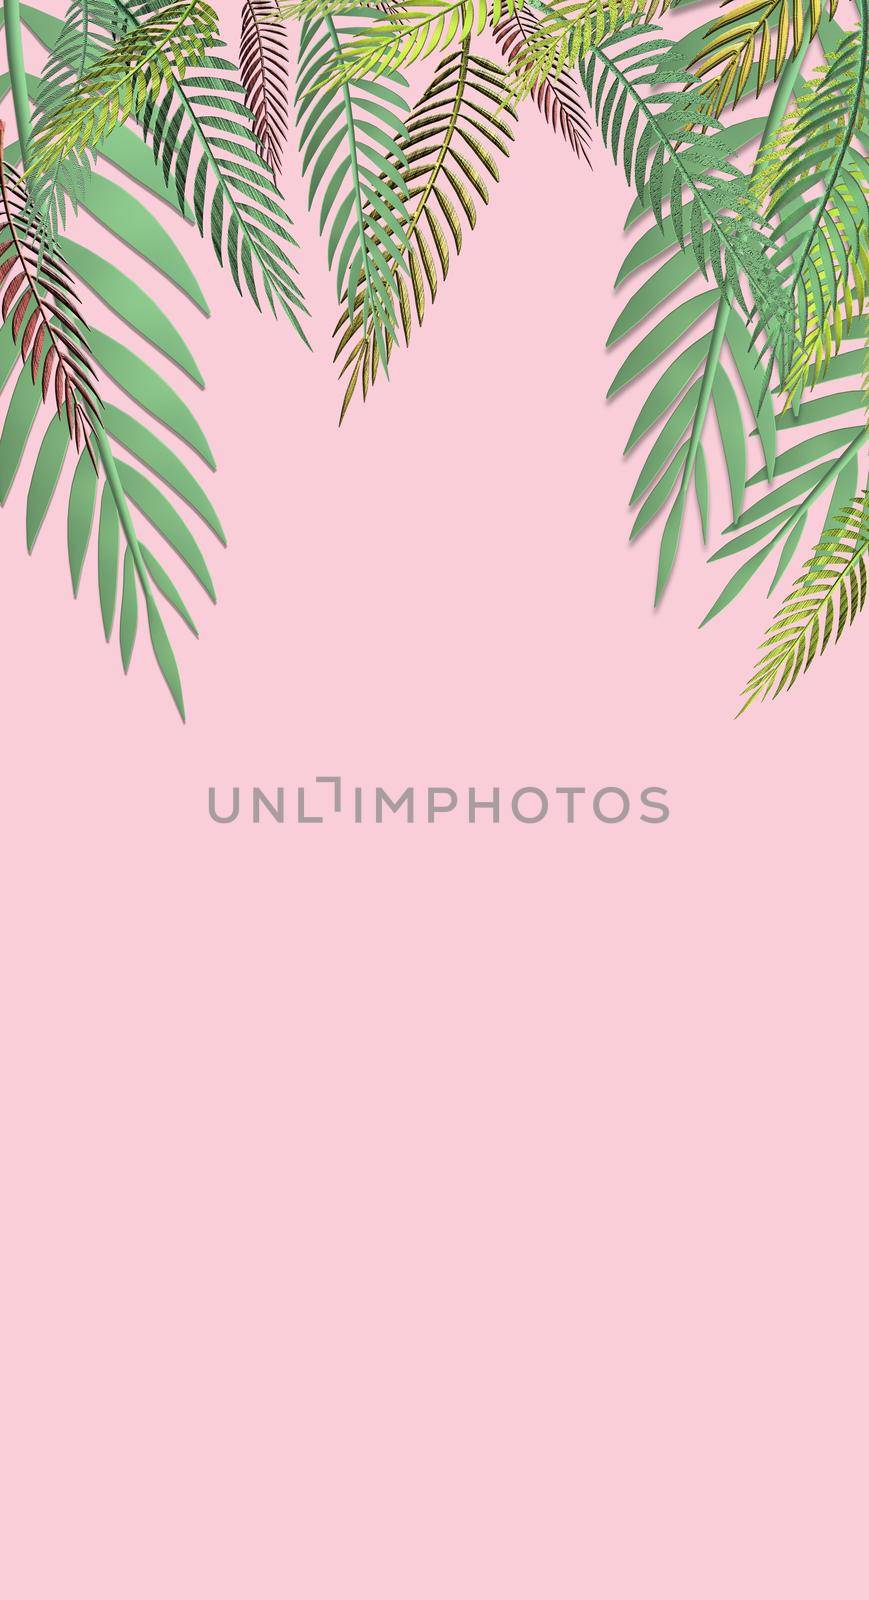 Tropical green leaves pattern on pink background. Exotic wallpaper. 3D illustration